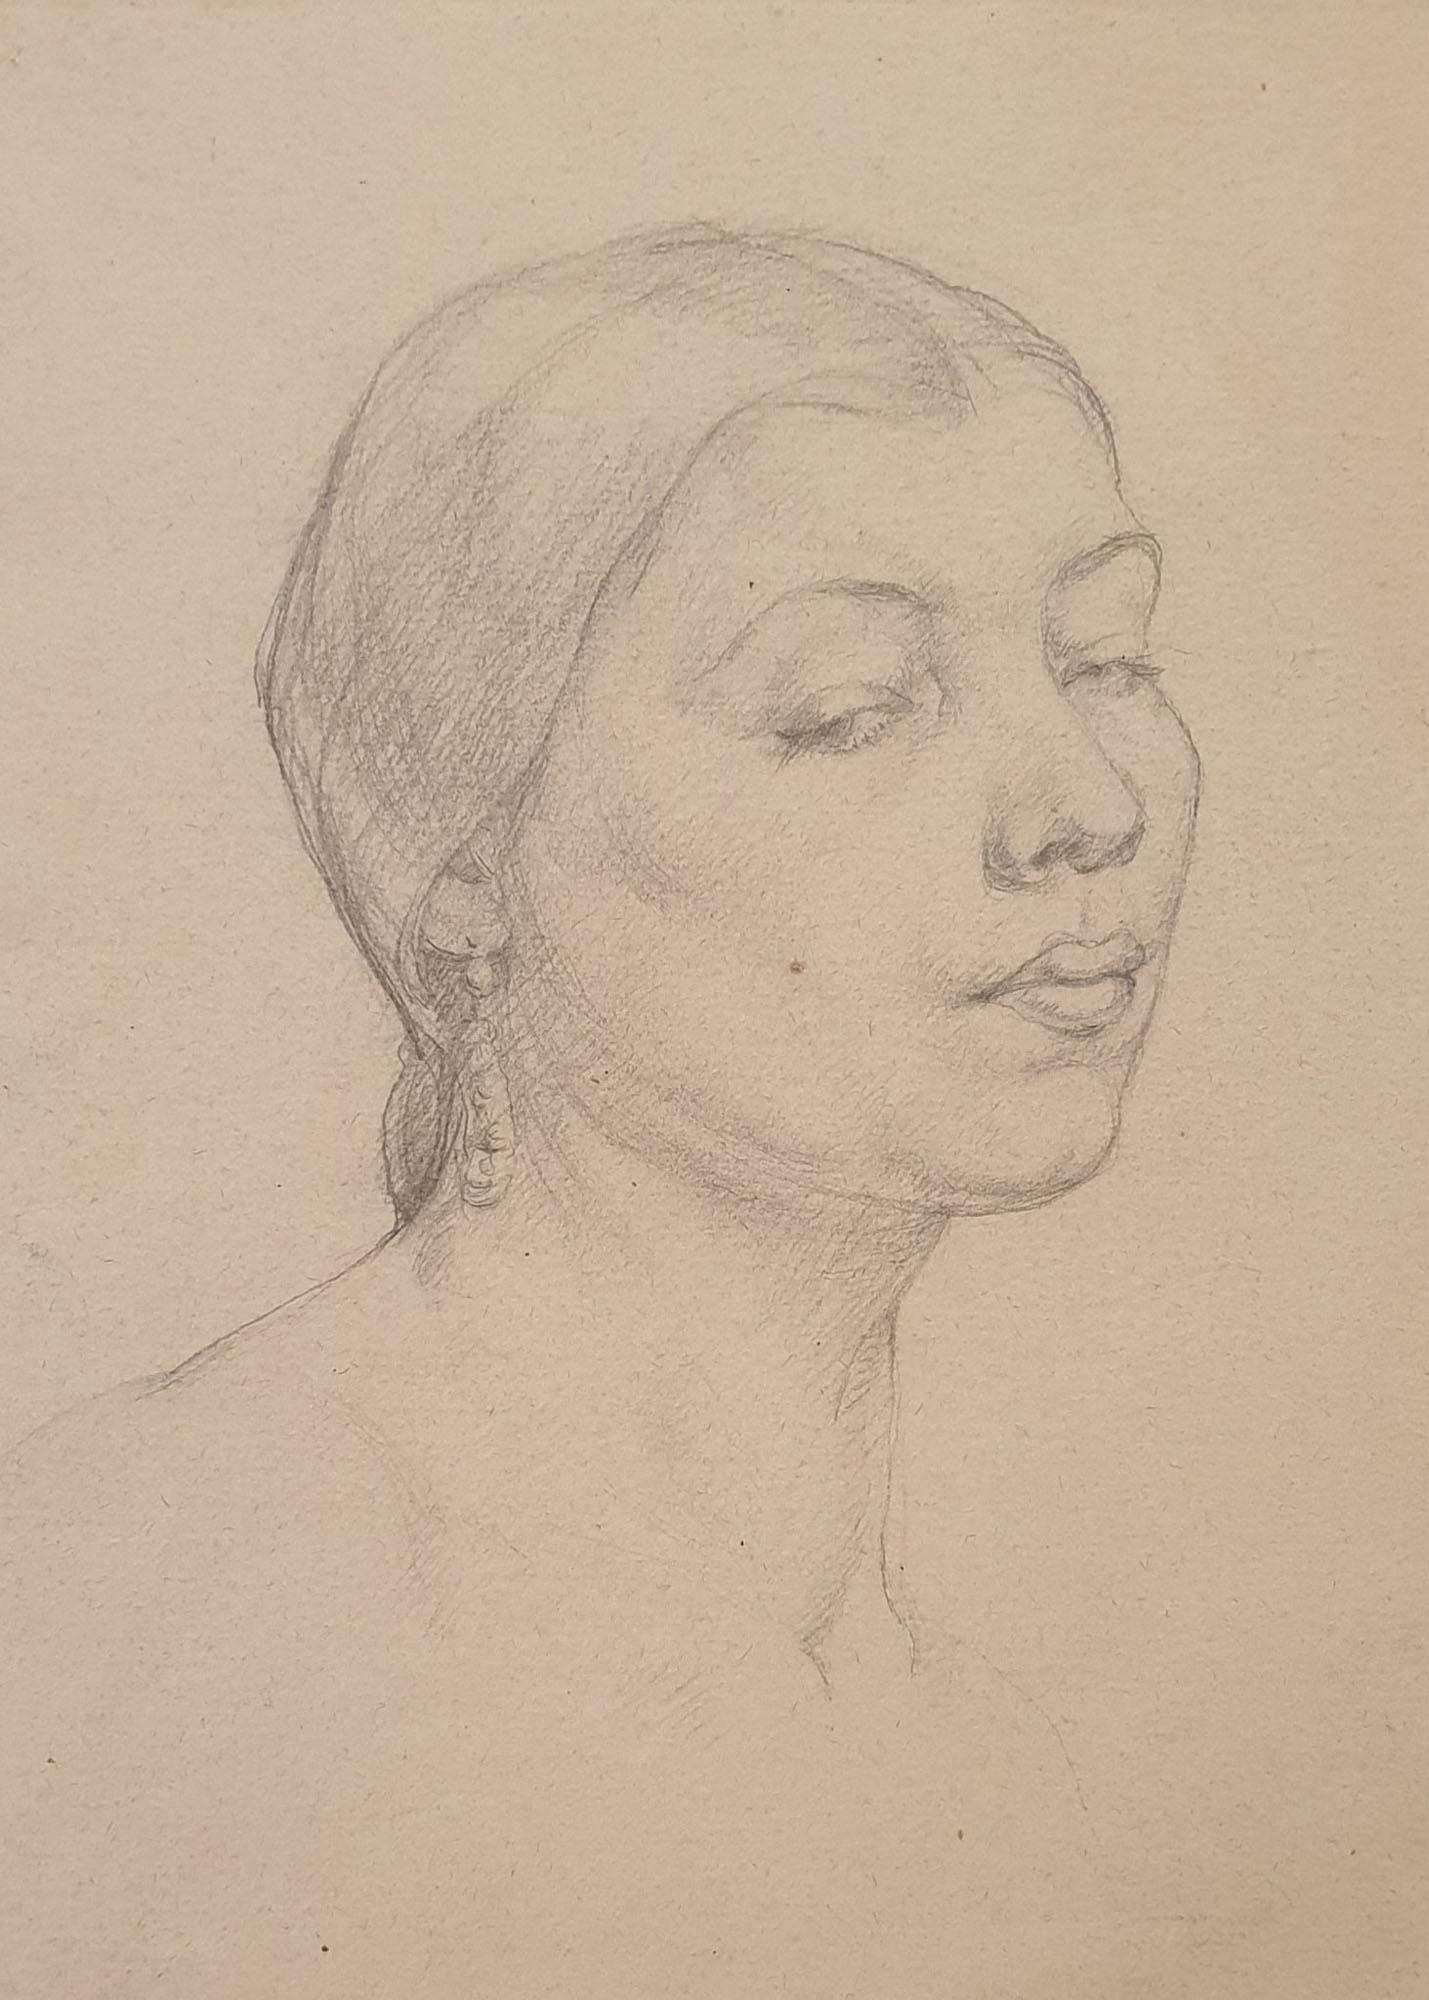 Antique early 20th century pencil portrait study.
British. 'Slade School'.
Circle of Mark Gertler. 

The measurements:
24.5 x 22.9 cm. 

Condition: General used, age related wear, good overall condition. 


